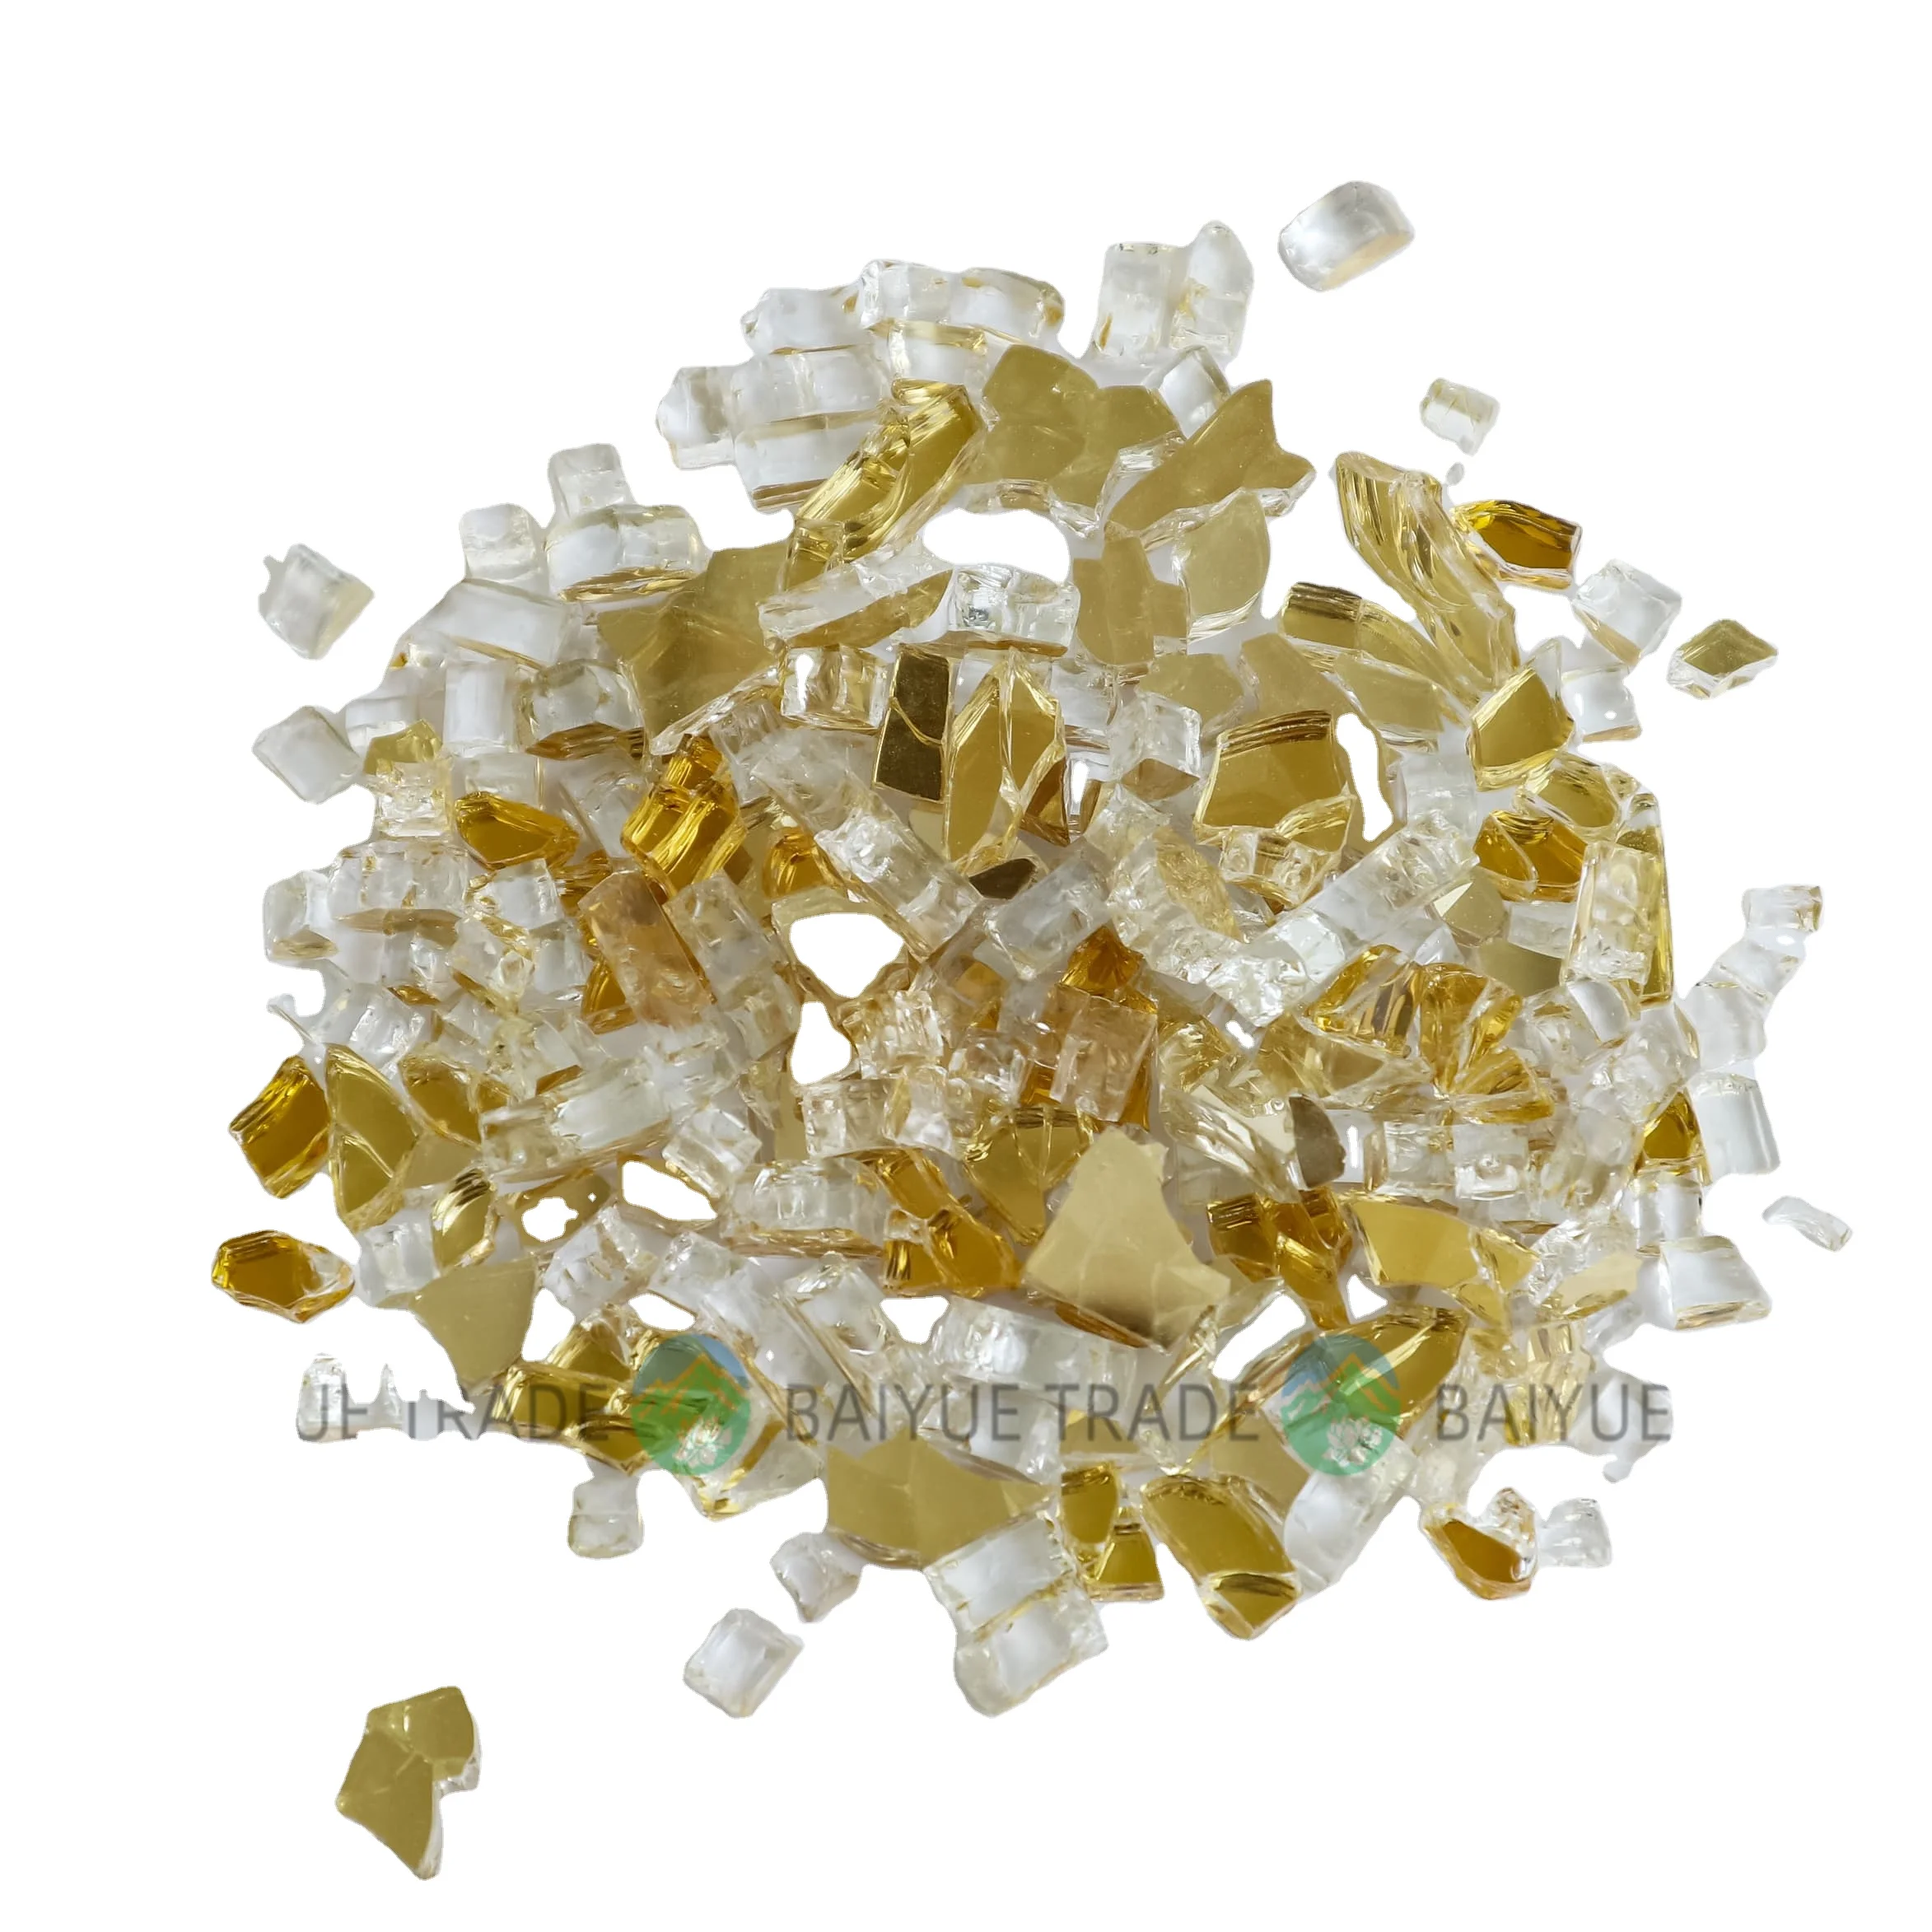 Fire Glass for Fire Pit, 1/2 Inch 10 Pounds High Luster Reflective Tempered Glass Rocks for Natural or Propane Fireplace